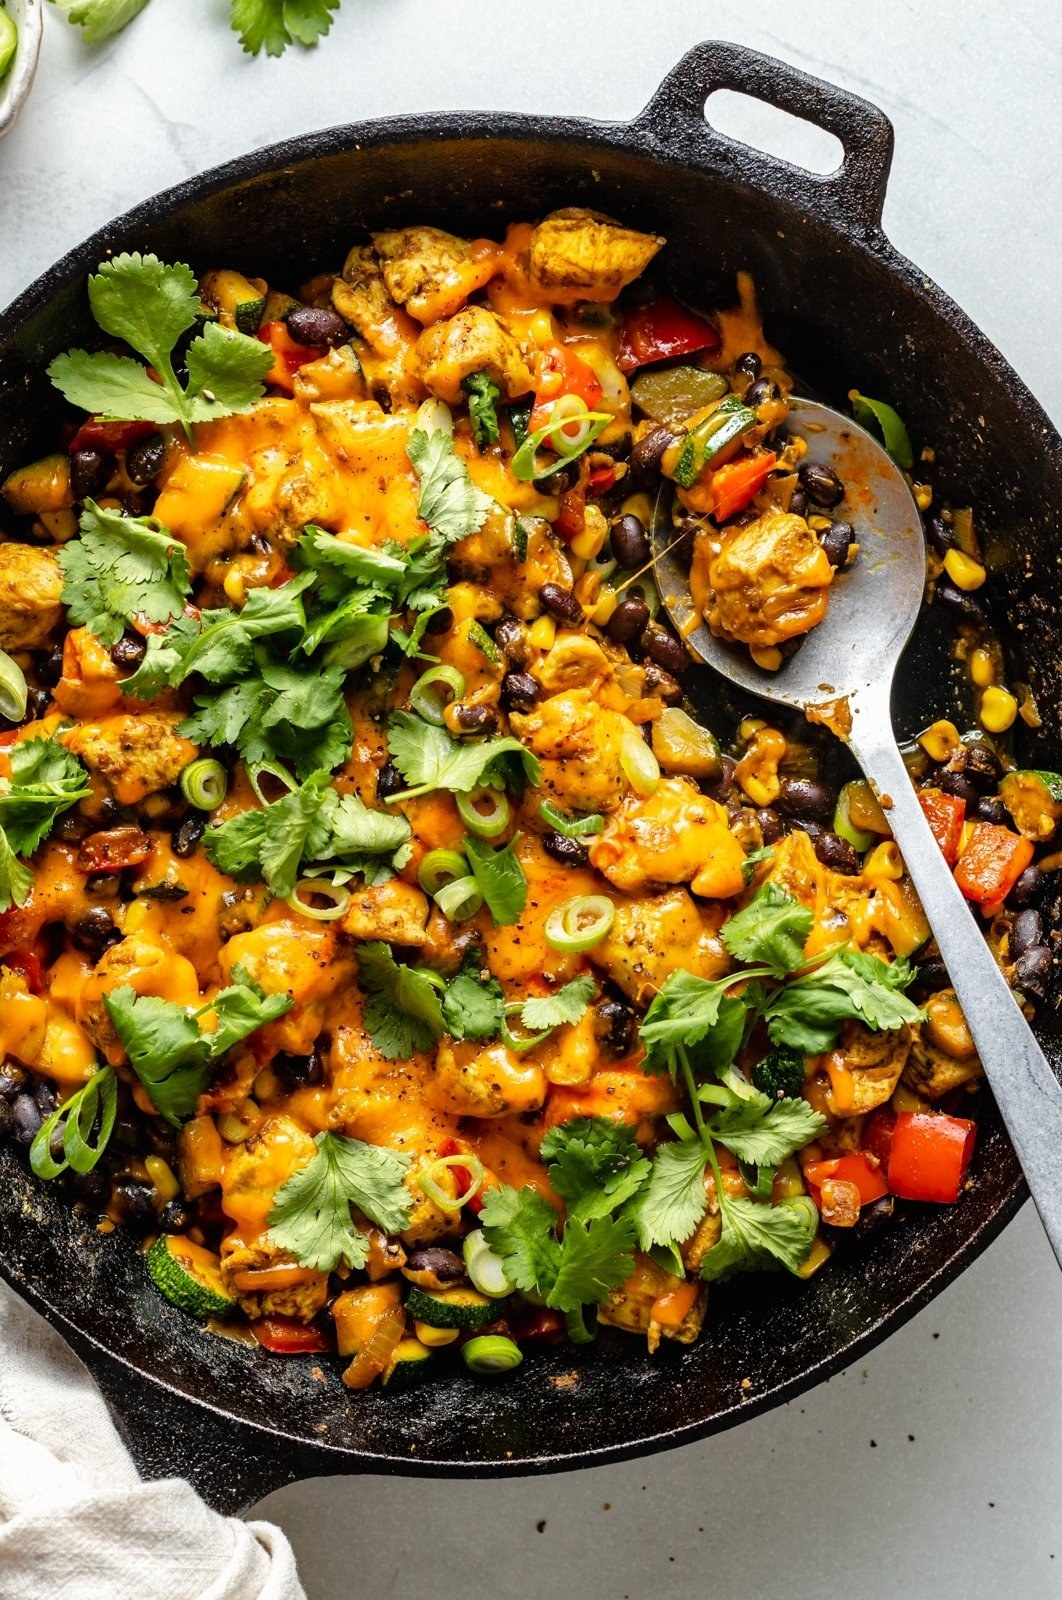 52 Easy One Pot Meals That Will Make Cleanup A Breeze